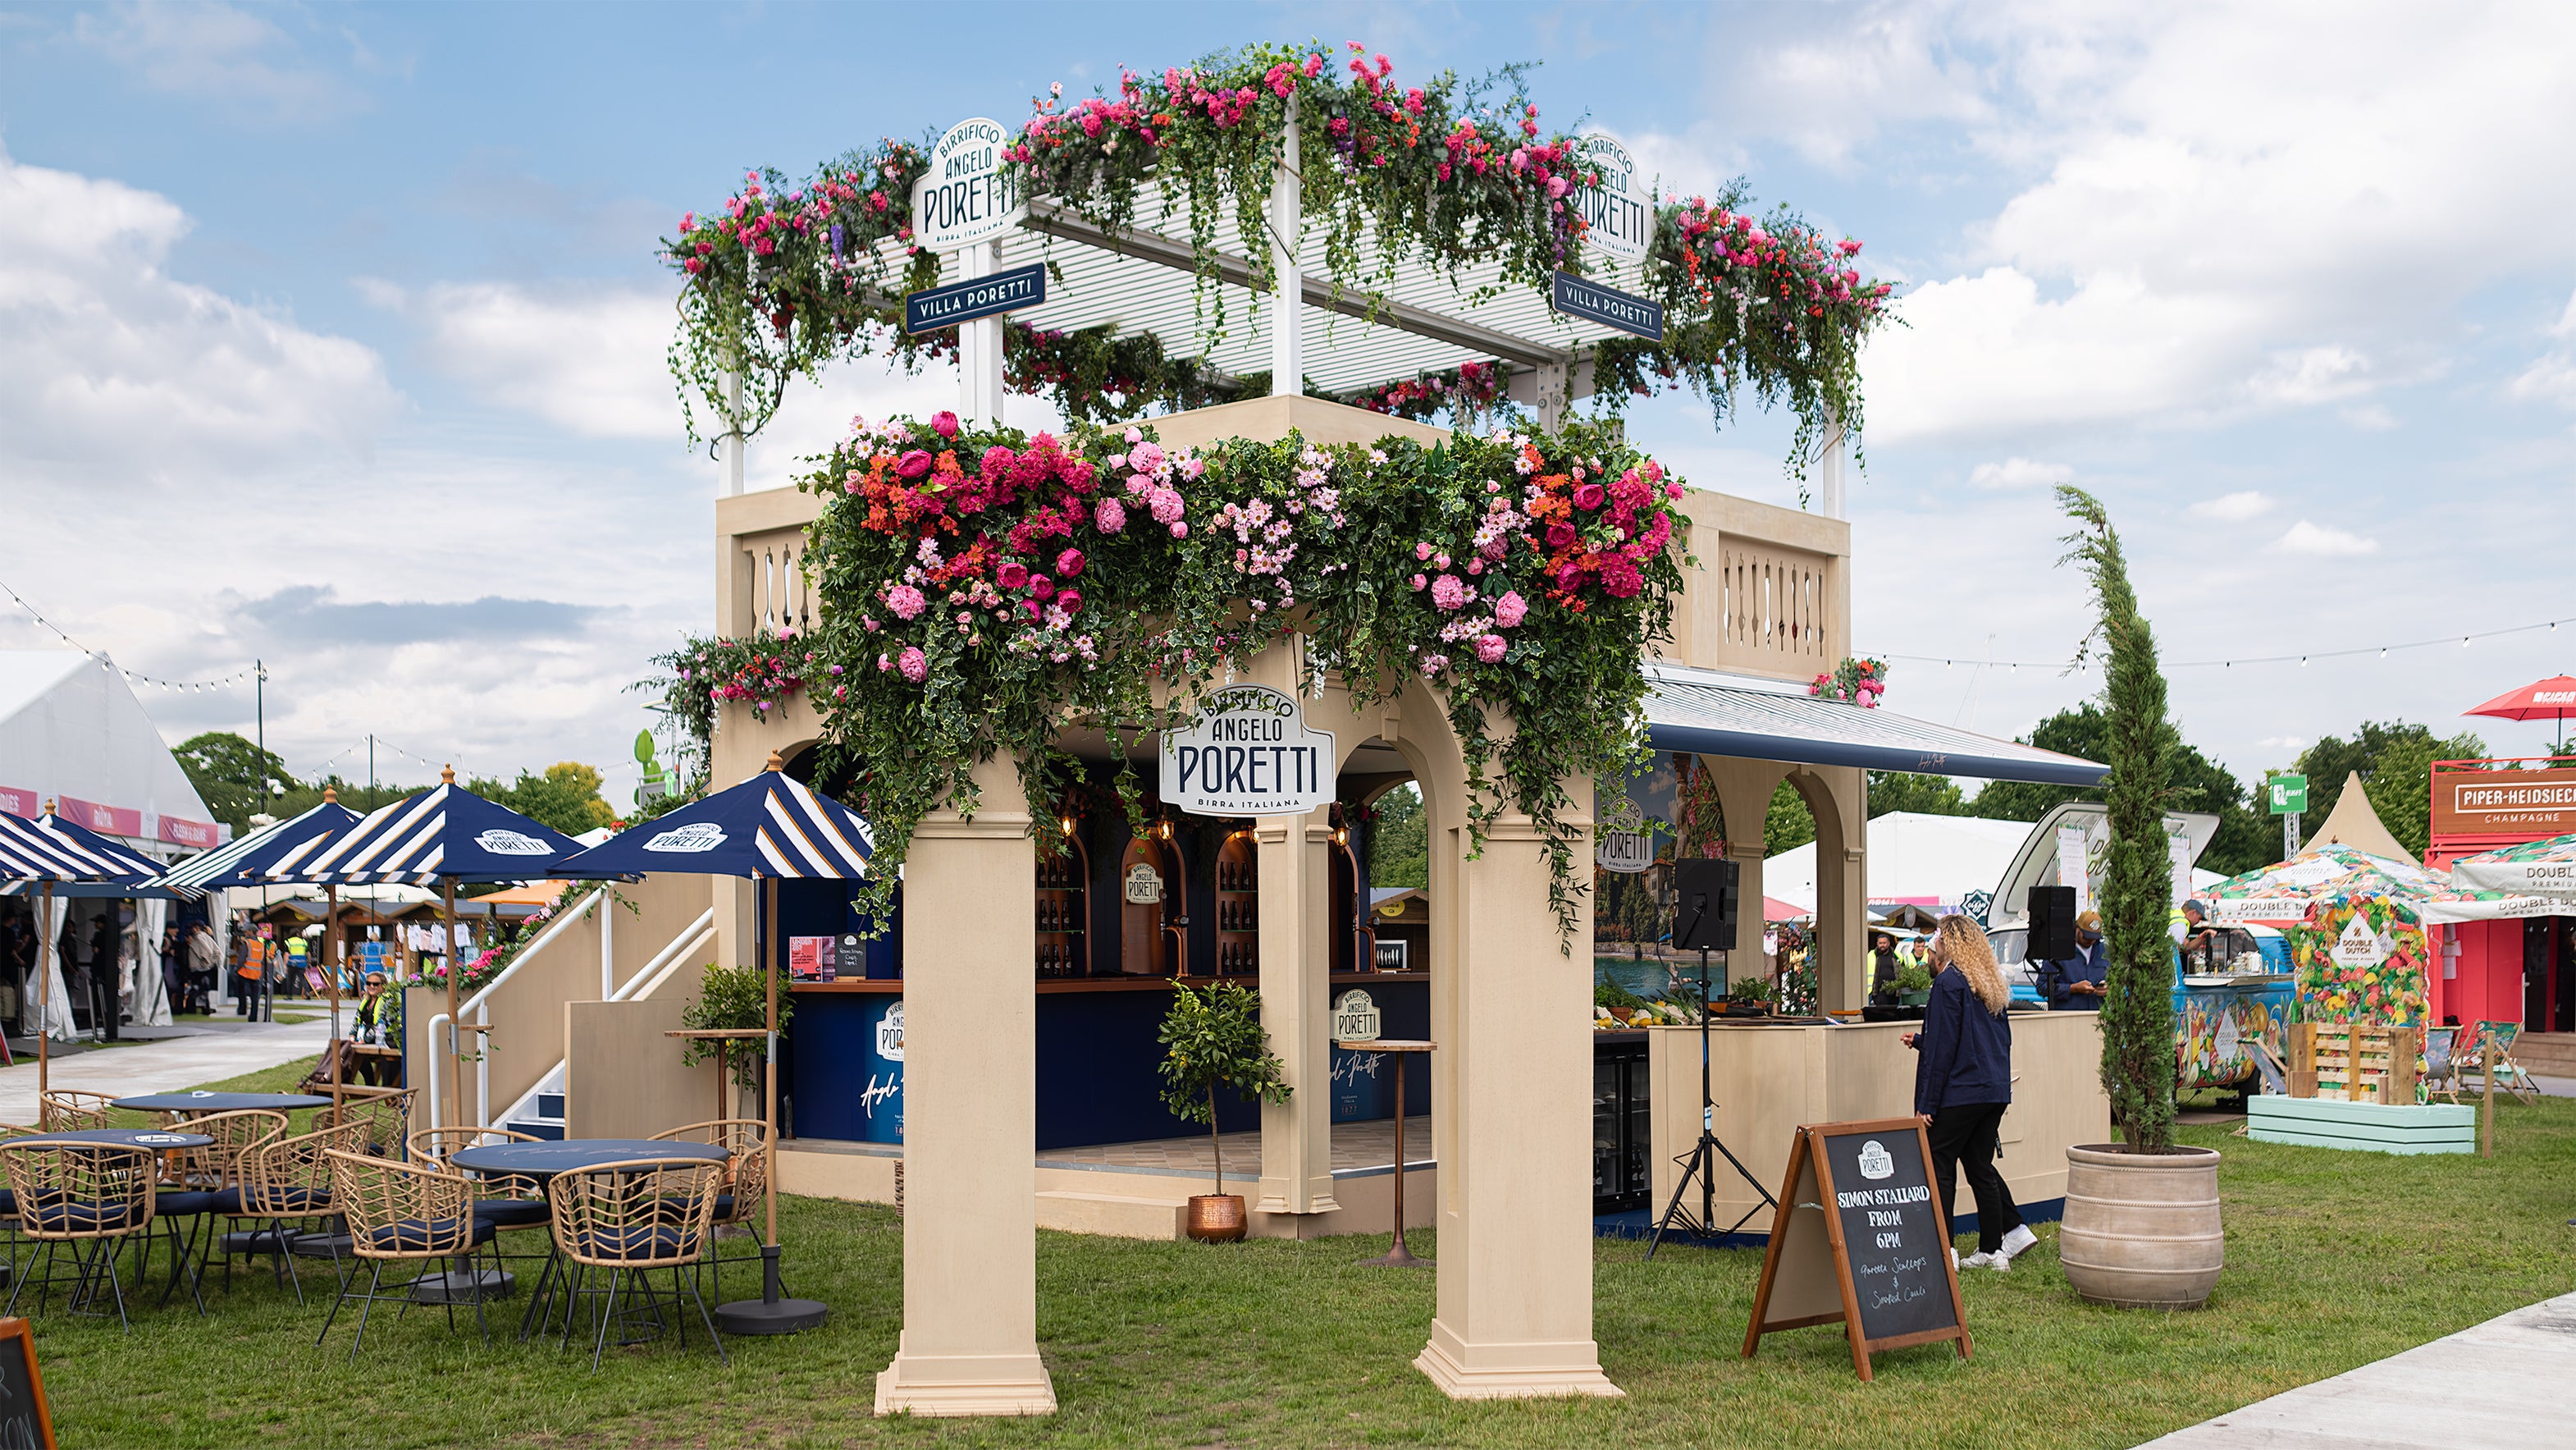 The Angelo Poretti beer stand at Regent’s Park Taste Festival Event, decorated with floral arrangements designed by Amaranté London. The archway is adorned with vibrant pink, red, and orange flowers and lush green foliage. Blue awnings and wicker chairs enhance the Mediterranean ambience.